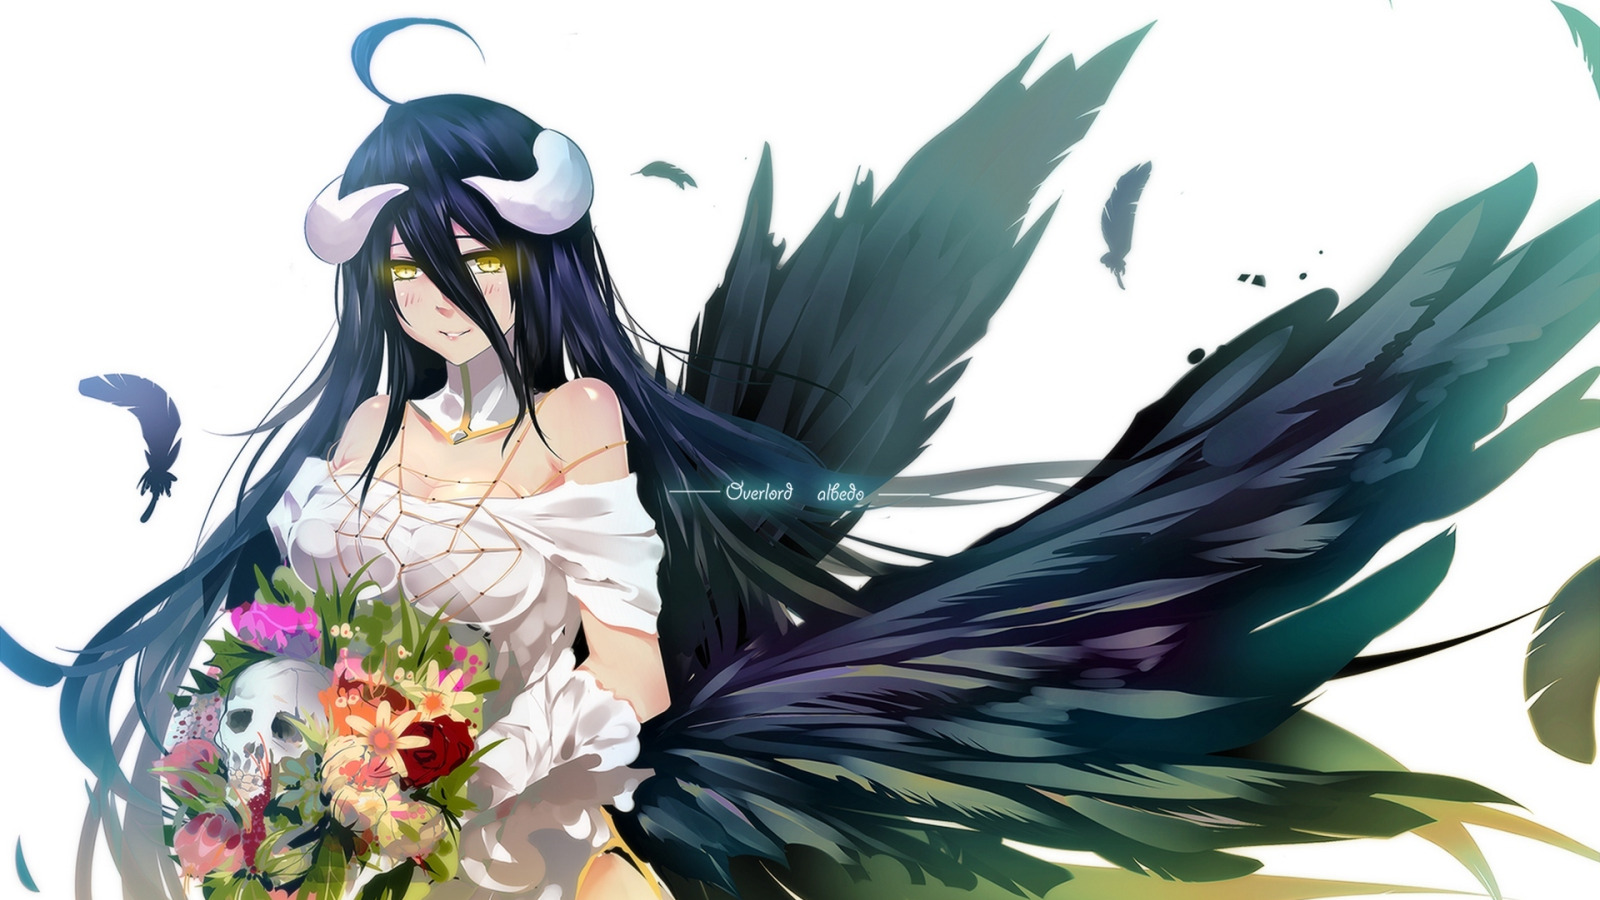 Download Wallpaper Girl Flowers Smile Bouquet Anime Art Horns Bba Biao Albedo Overlord Section Seinen In Resolution 1600x900